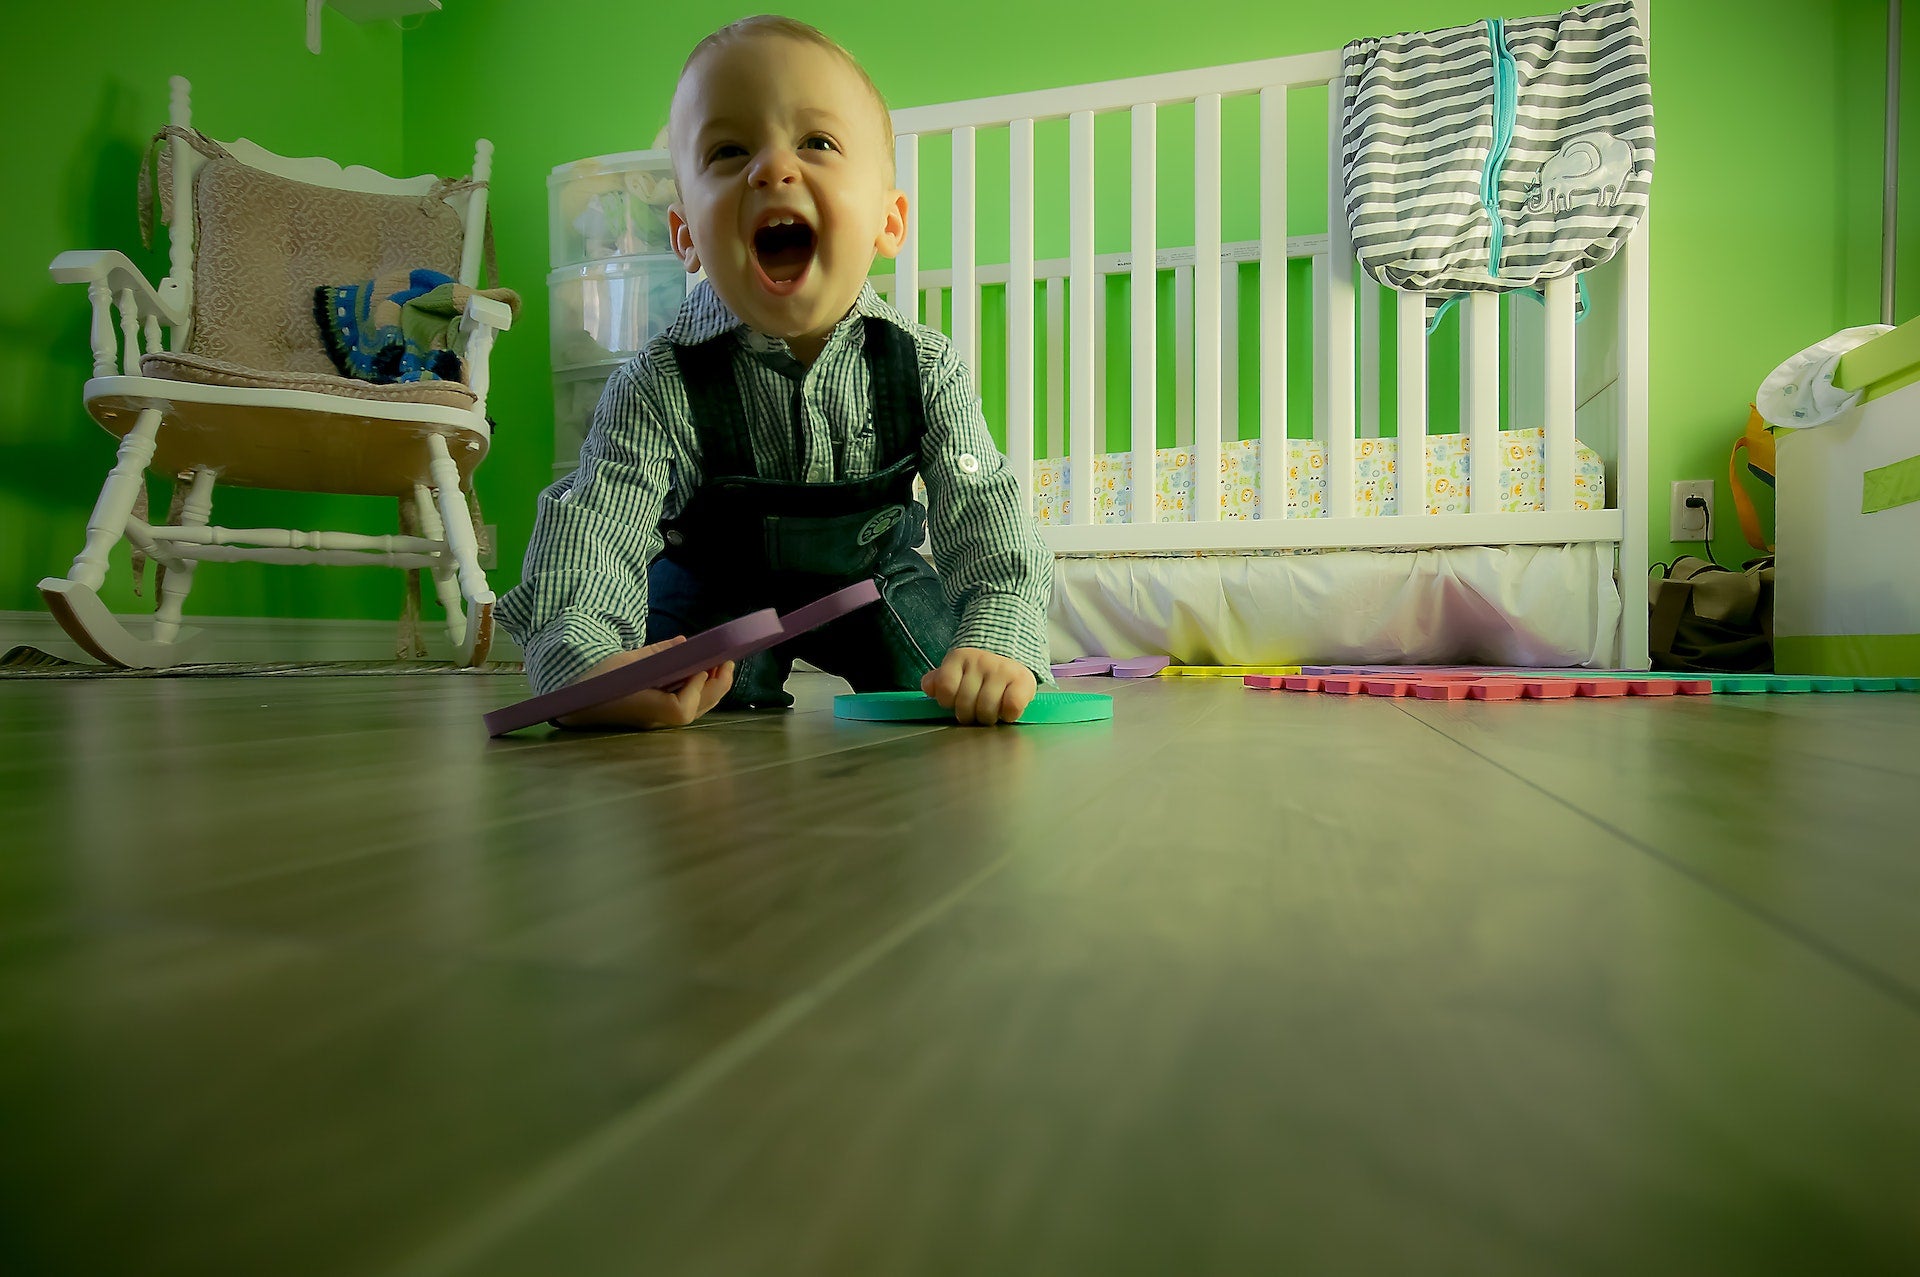 toddler playing in a green bedroom